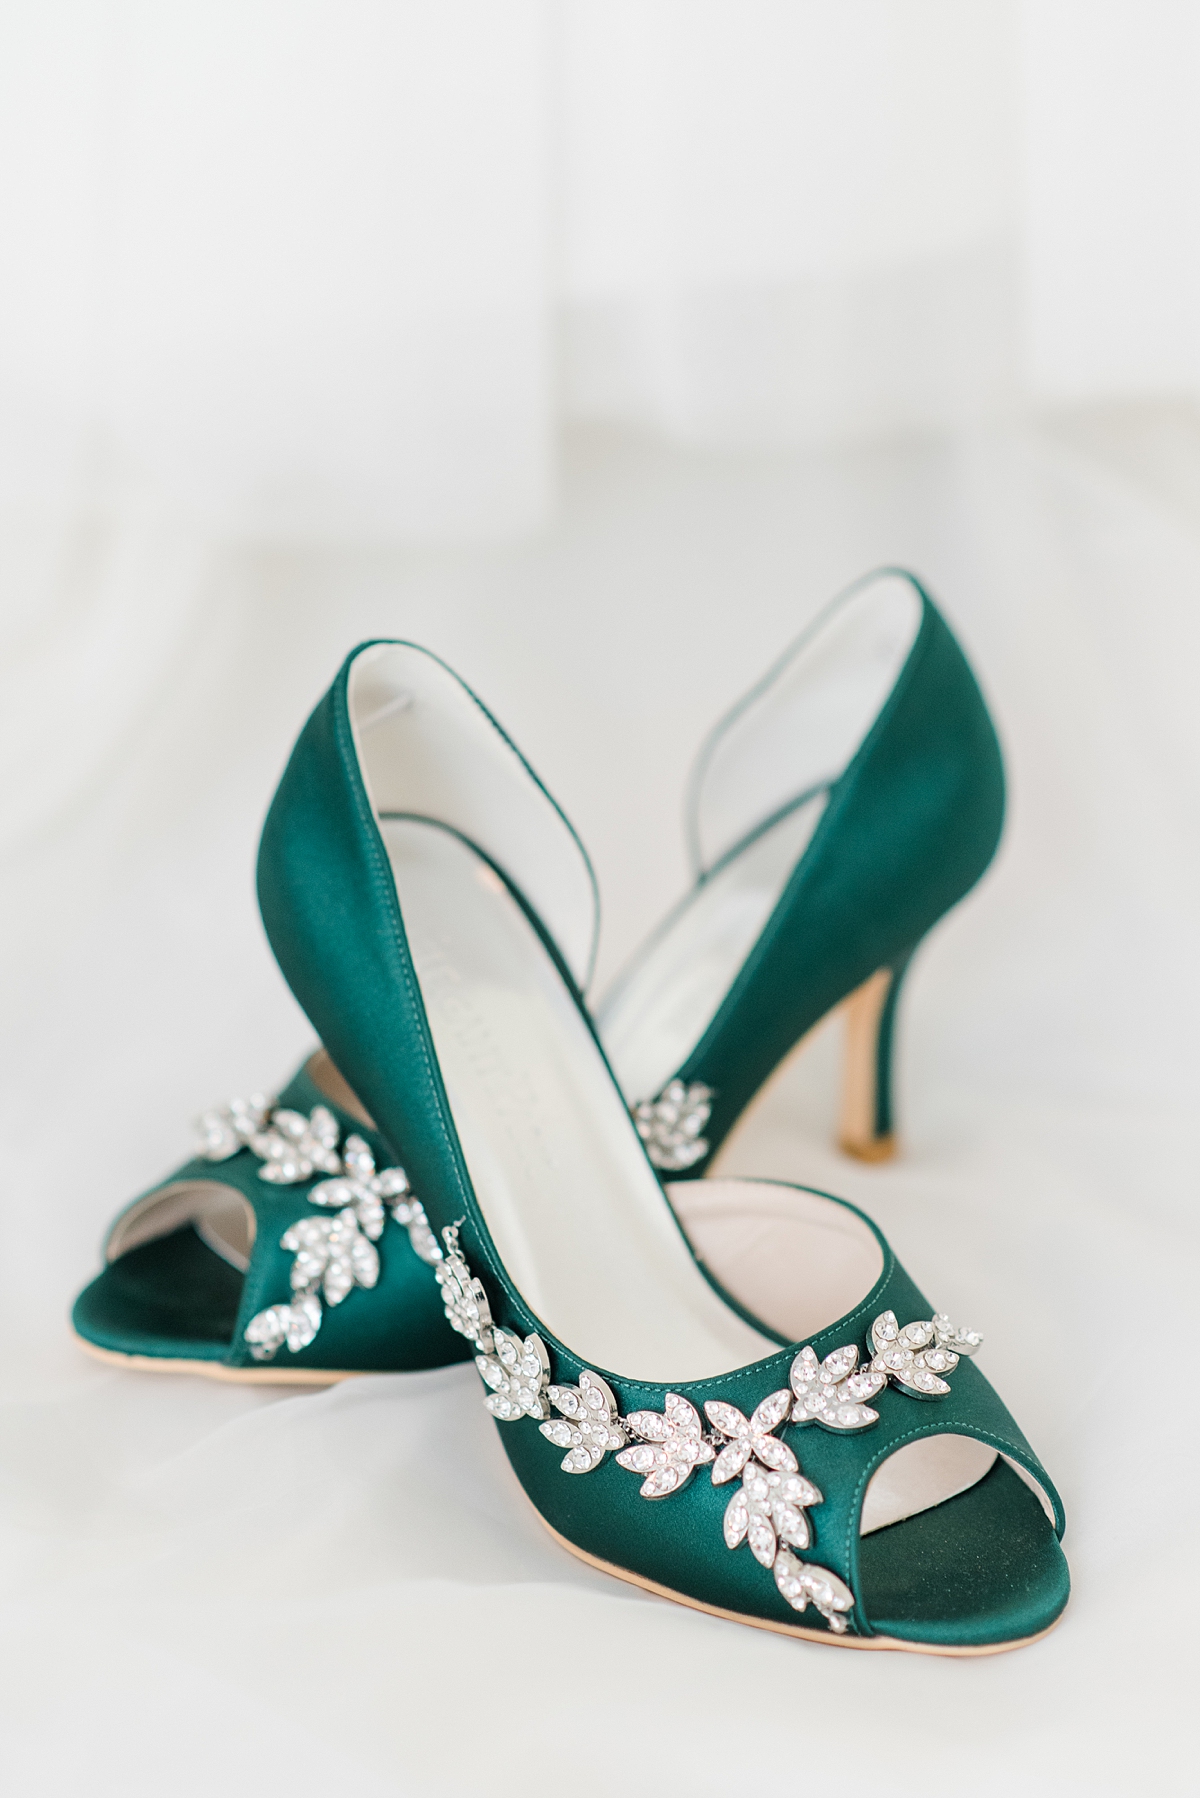 Bridal Details of Green Wedding Shoes at Dominion Club Wedding. Wedding Photography by Virginia Wedding Photographer Kailey Brianne Photography.